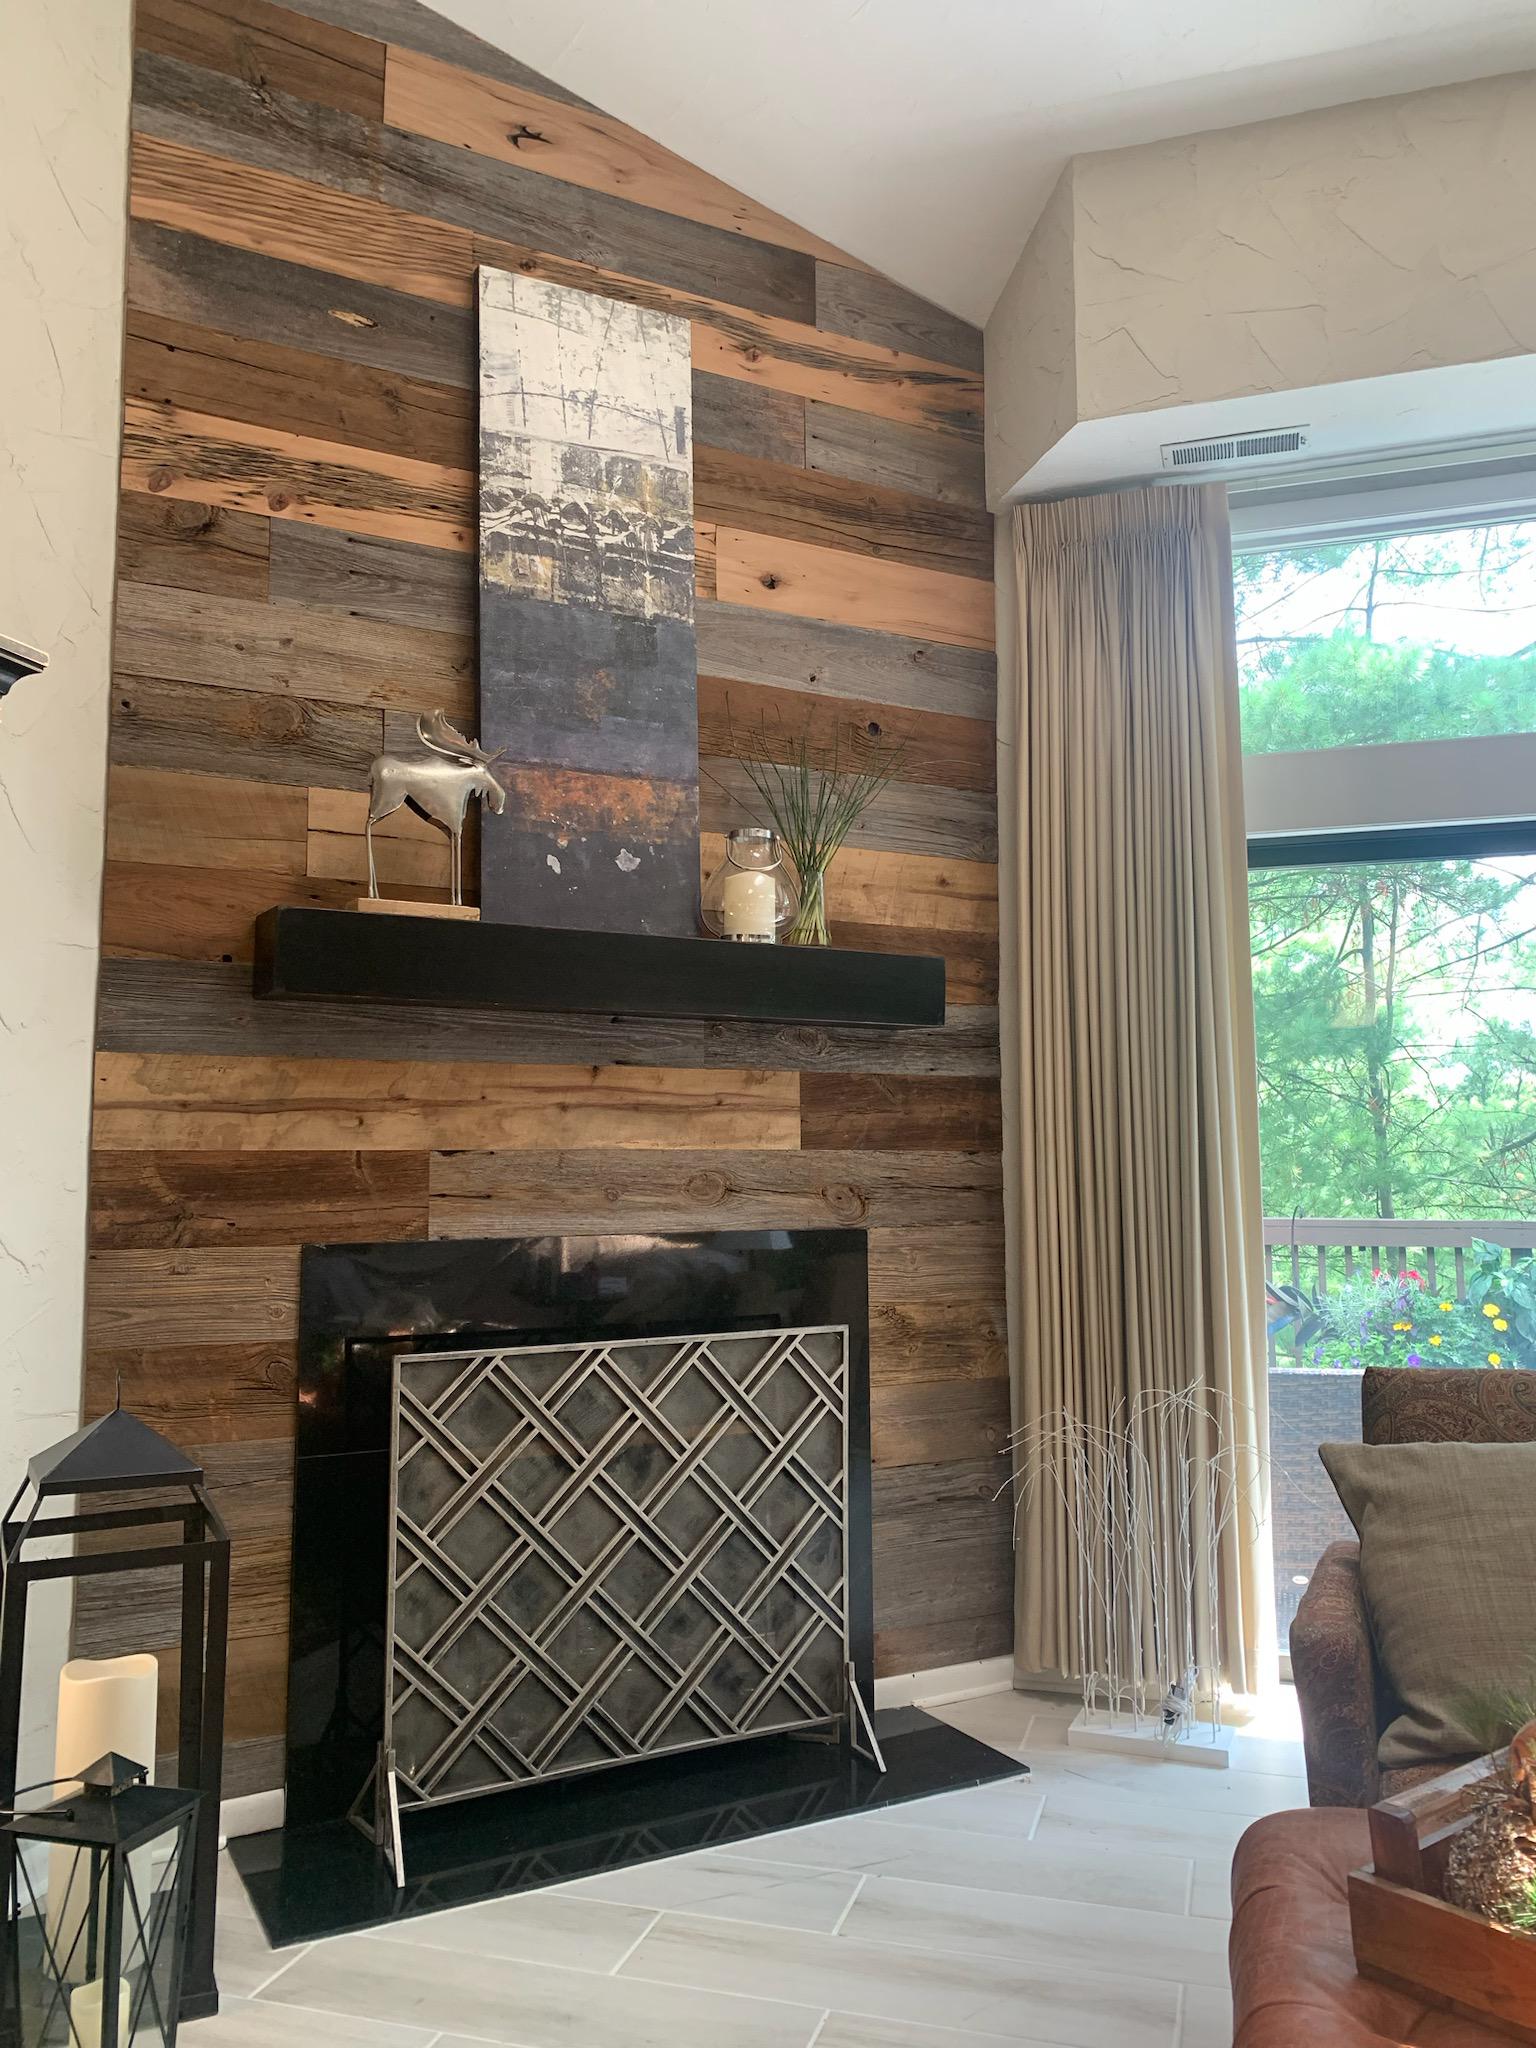 They did a great job picking out their Reclaimed wood for this fireplace wall. Using  a mixed species of barn siding. They tied it together with a black mantle and firebox frame!